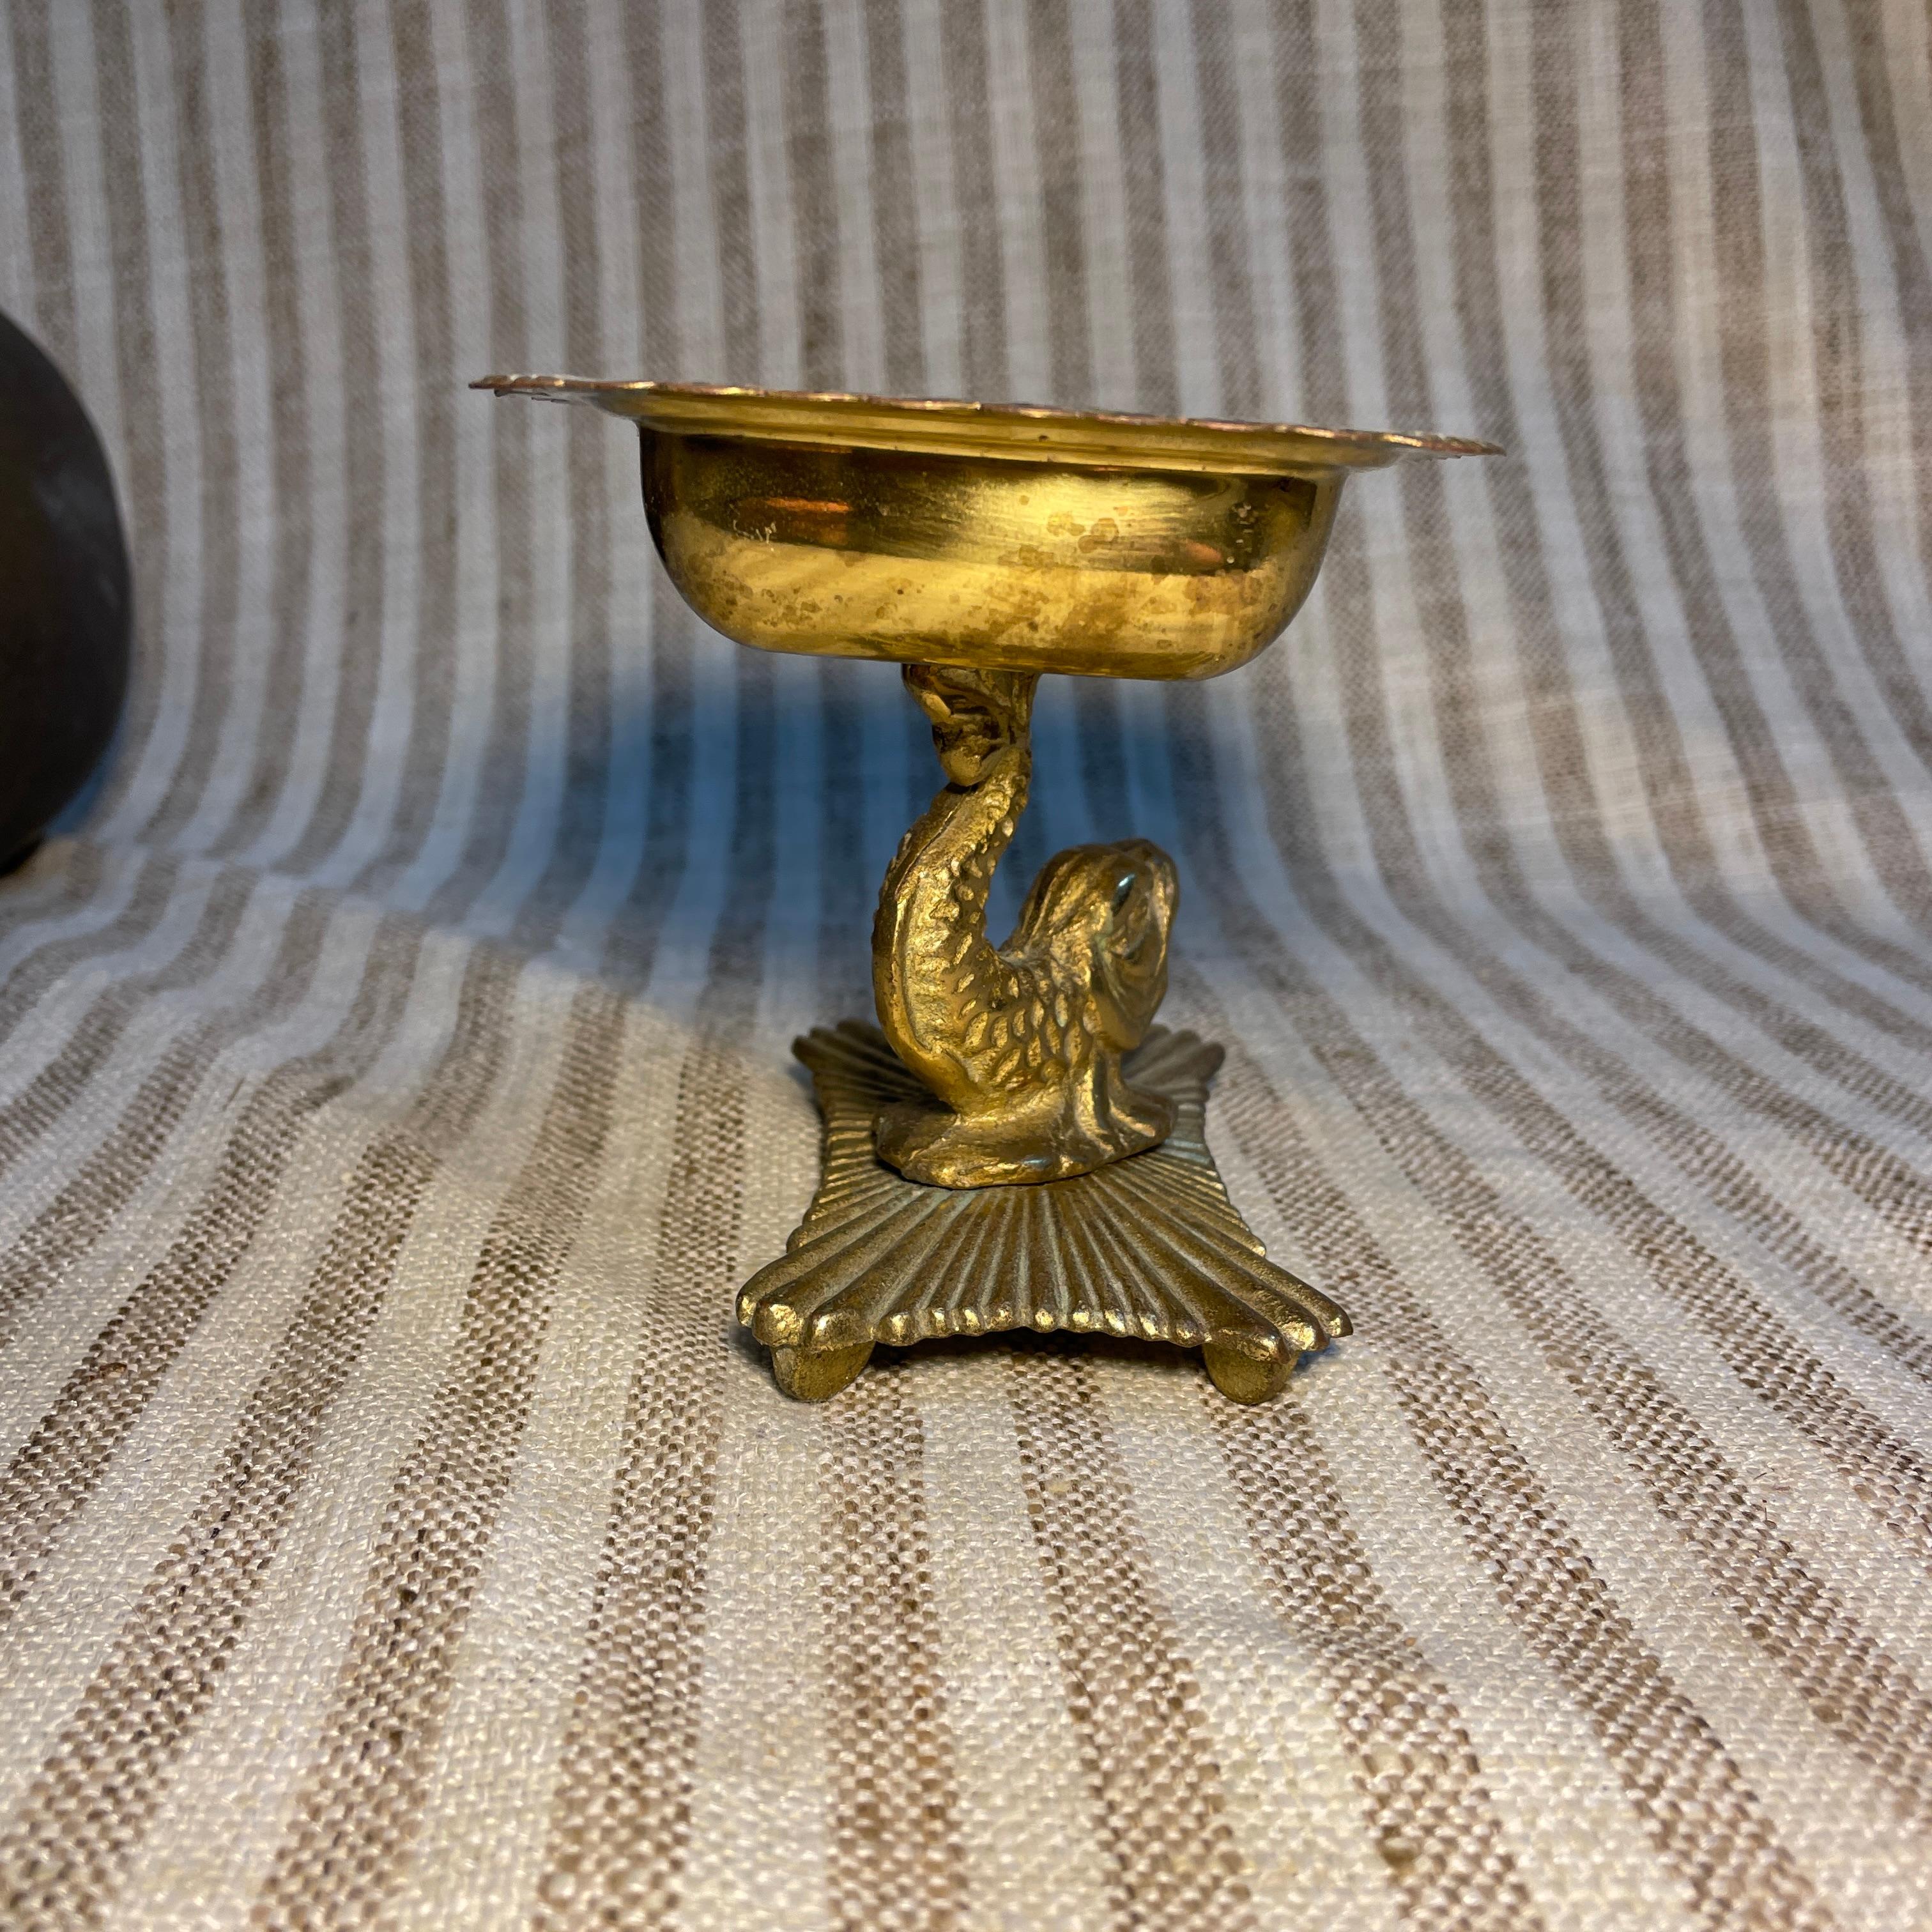 Brass and brass plated soap dish circa late 1930s early 1940s. There is some wear to the inside of the soap dish. The rest of the item is in good condition for its age. The base of this item that the koi fish is perched upon is the neatest! I love